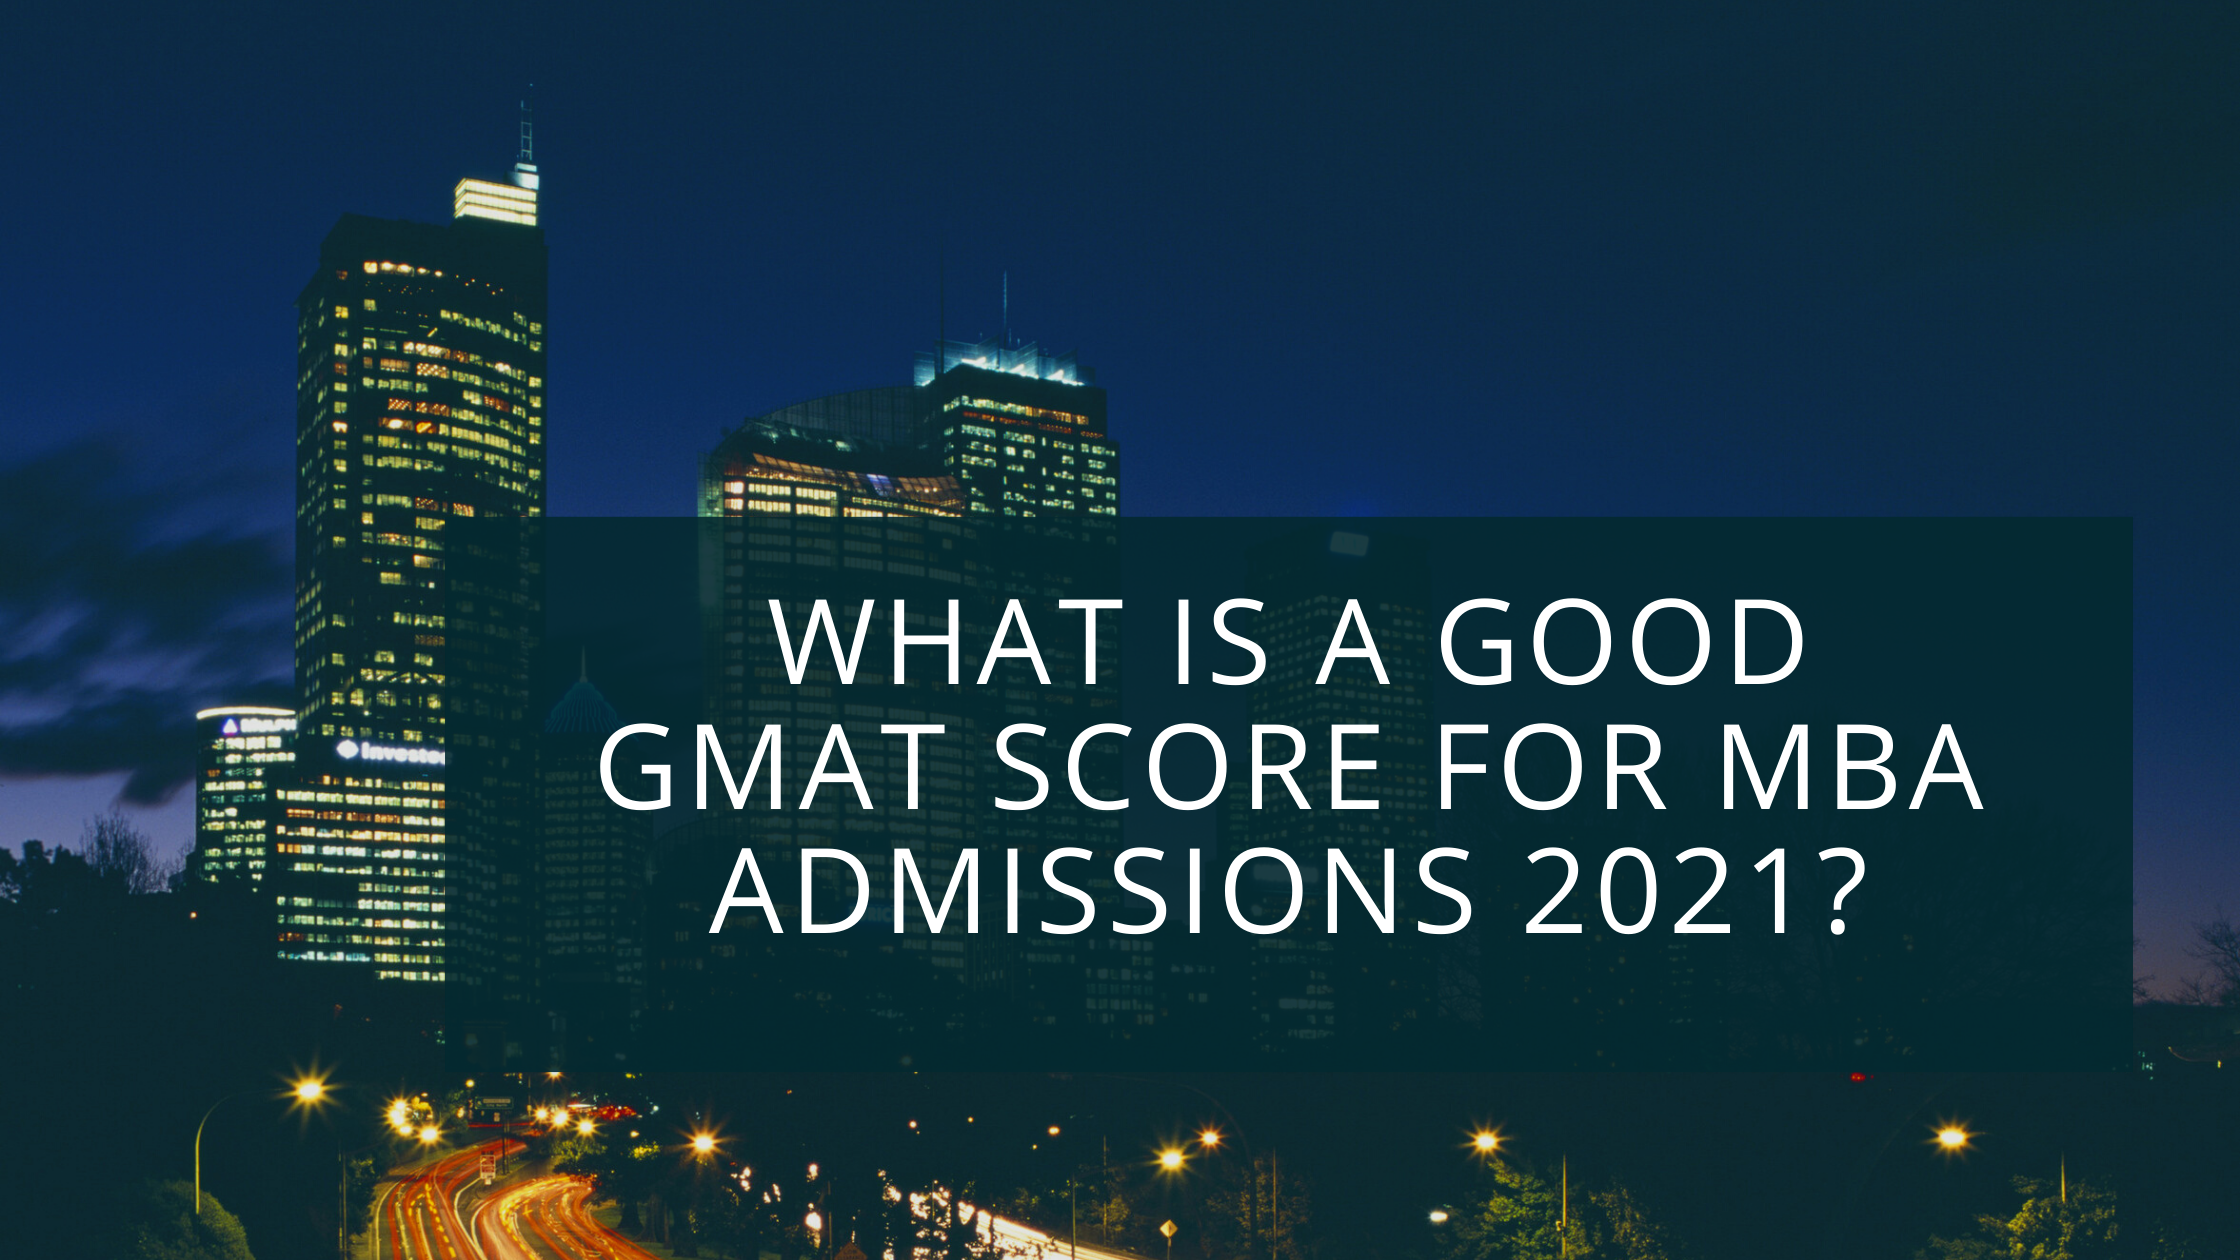 What is a Good GMAT Score for MBA Admissions 2021?